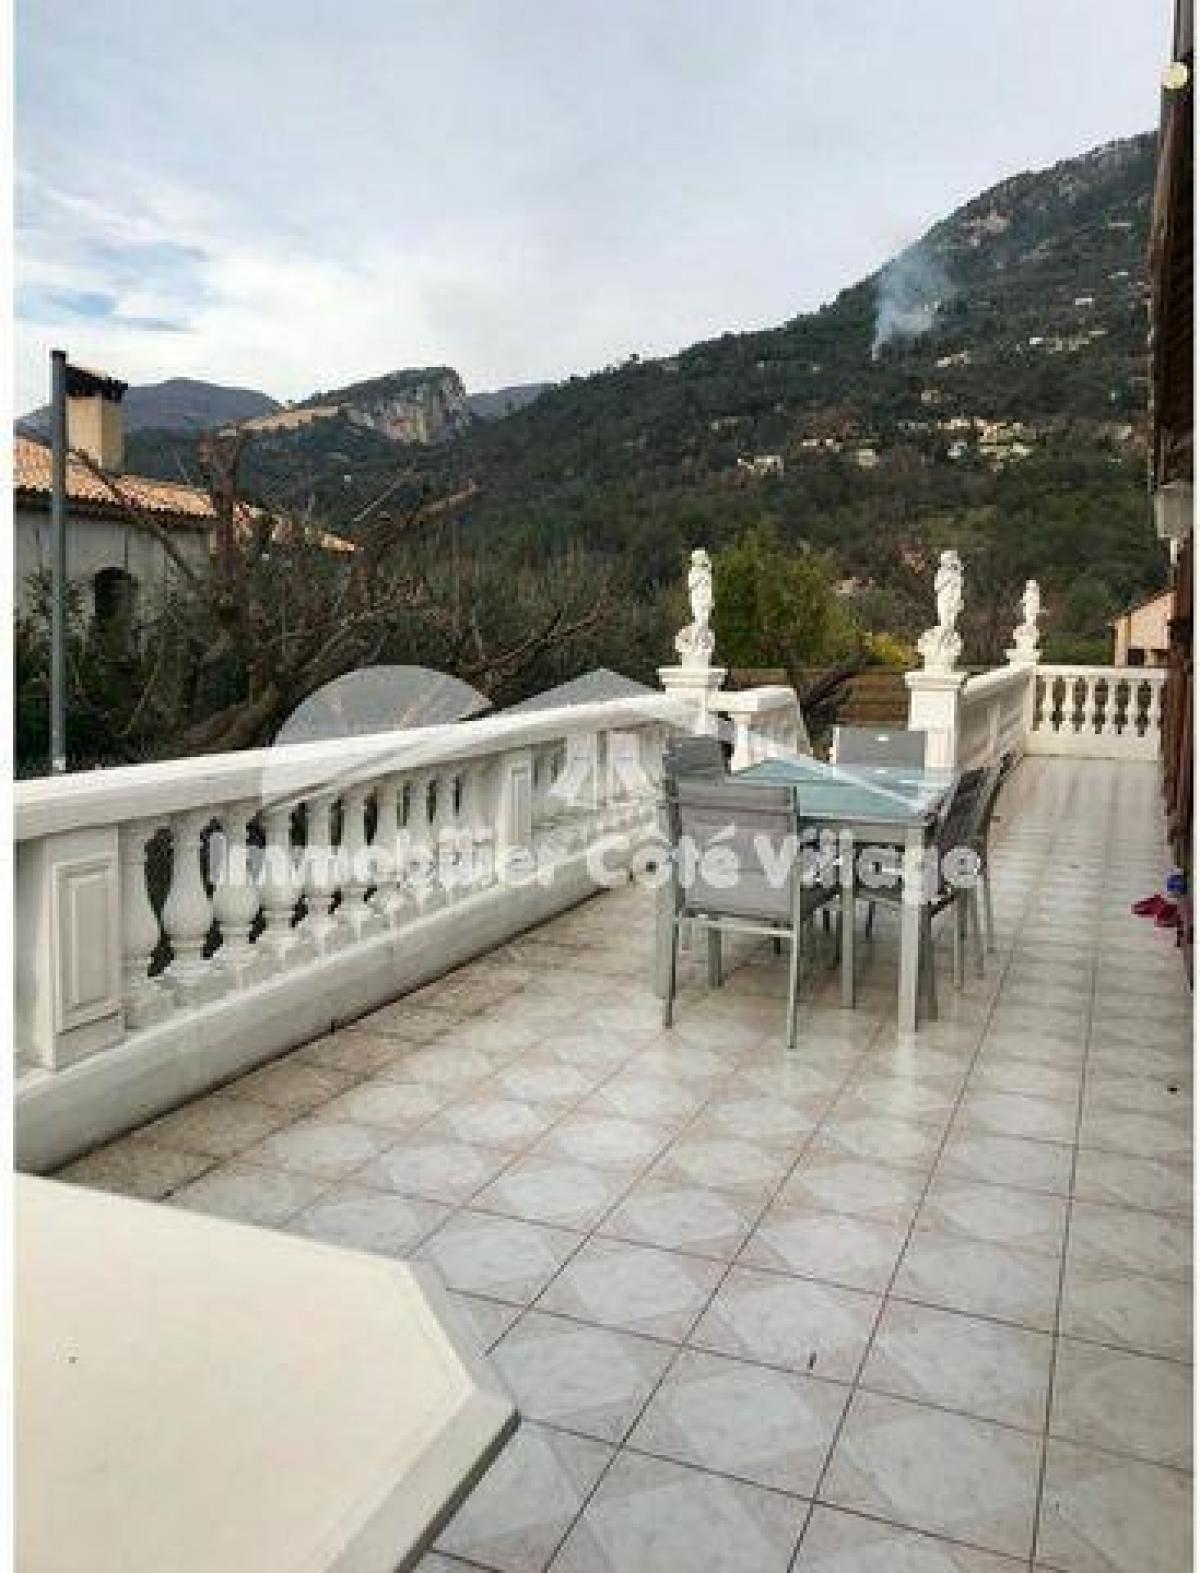 Picture of Home For Sale in Peille, Provence-Alpes-Cote d'Azur, France